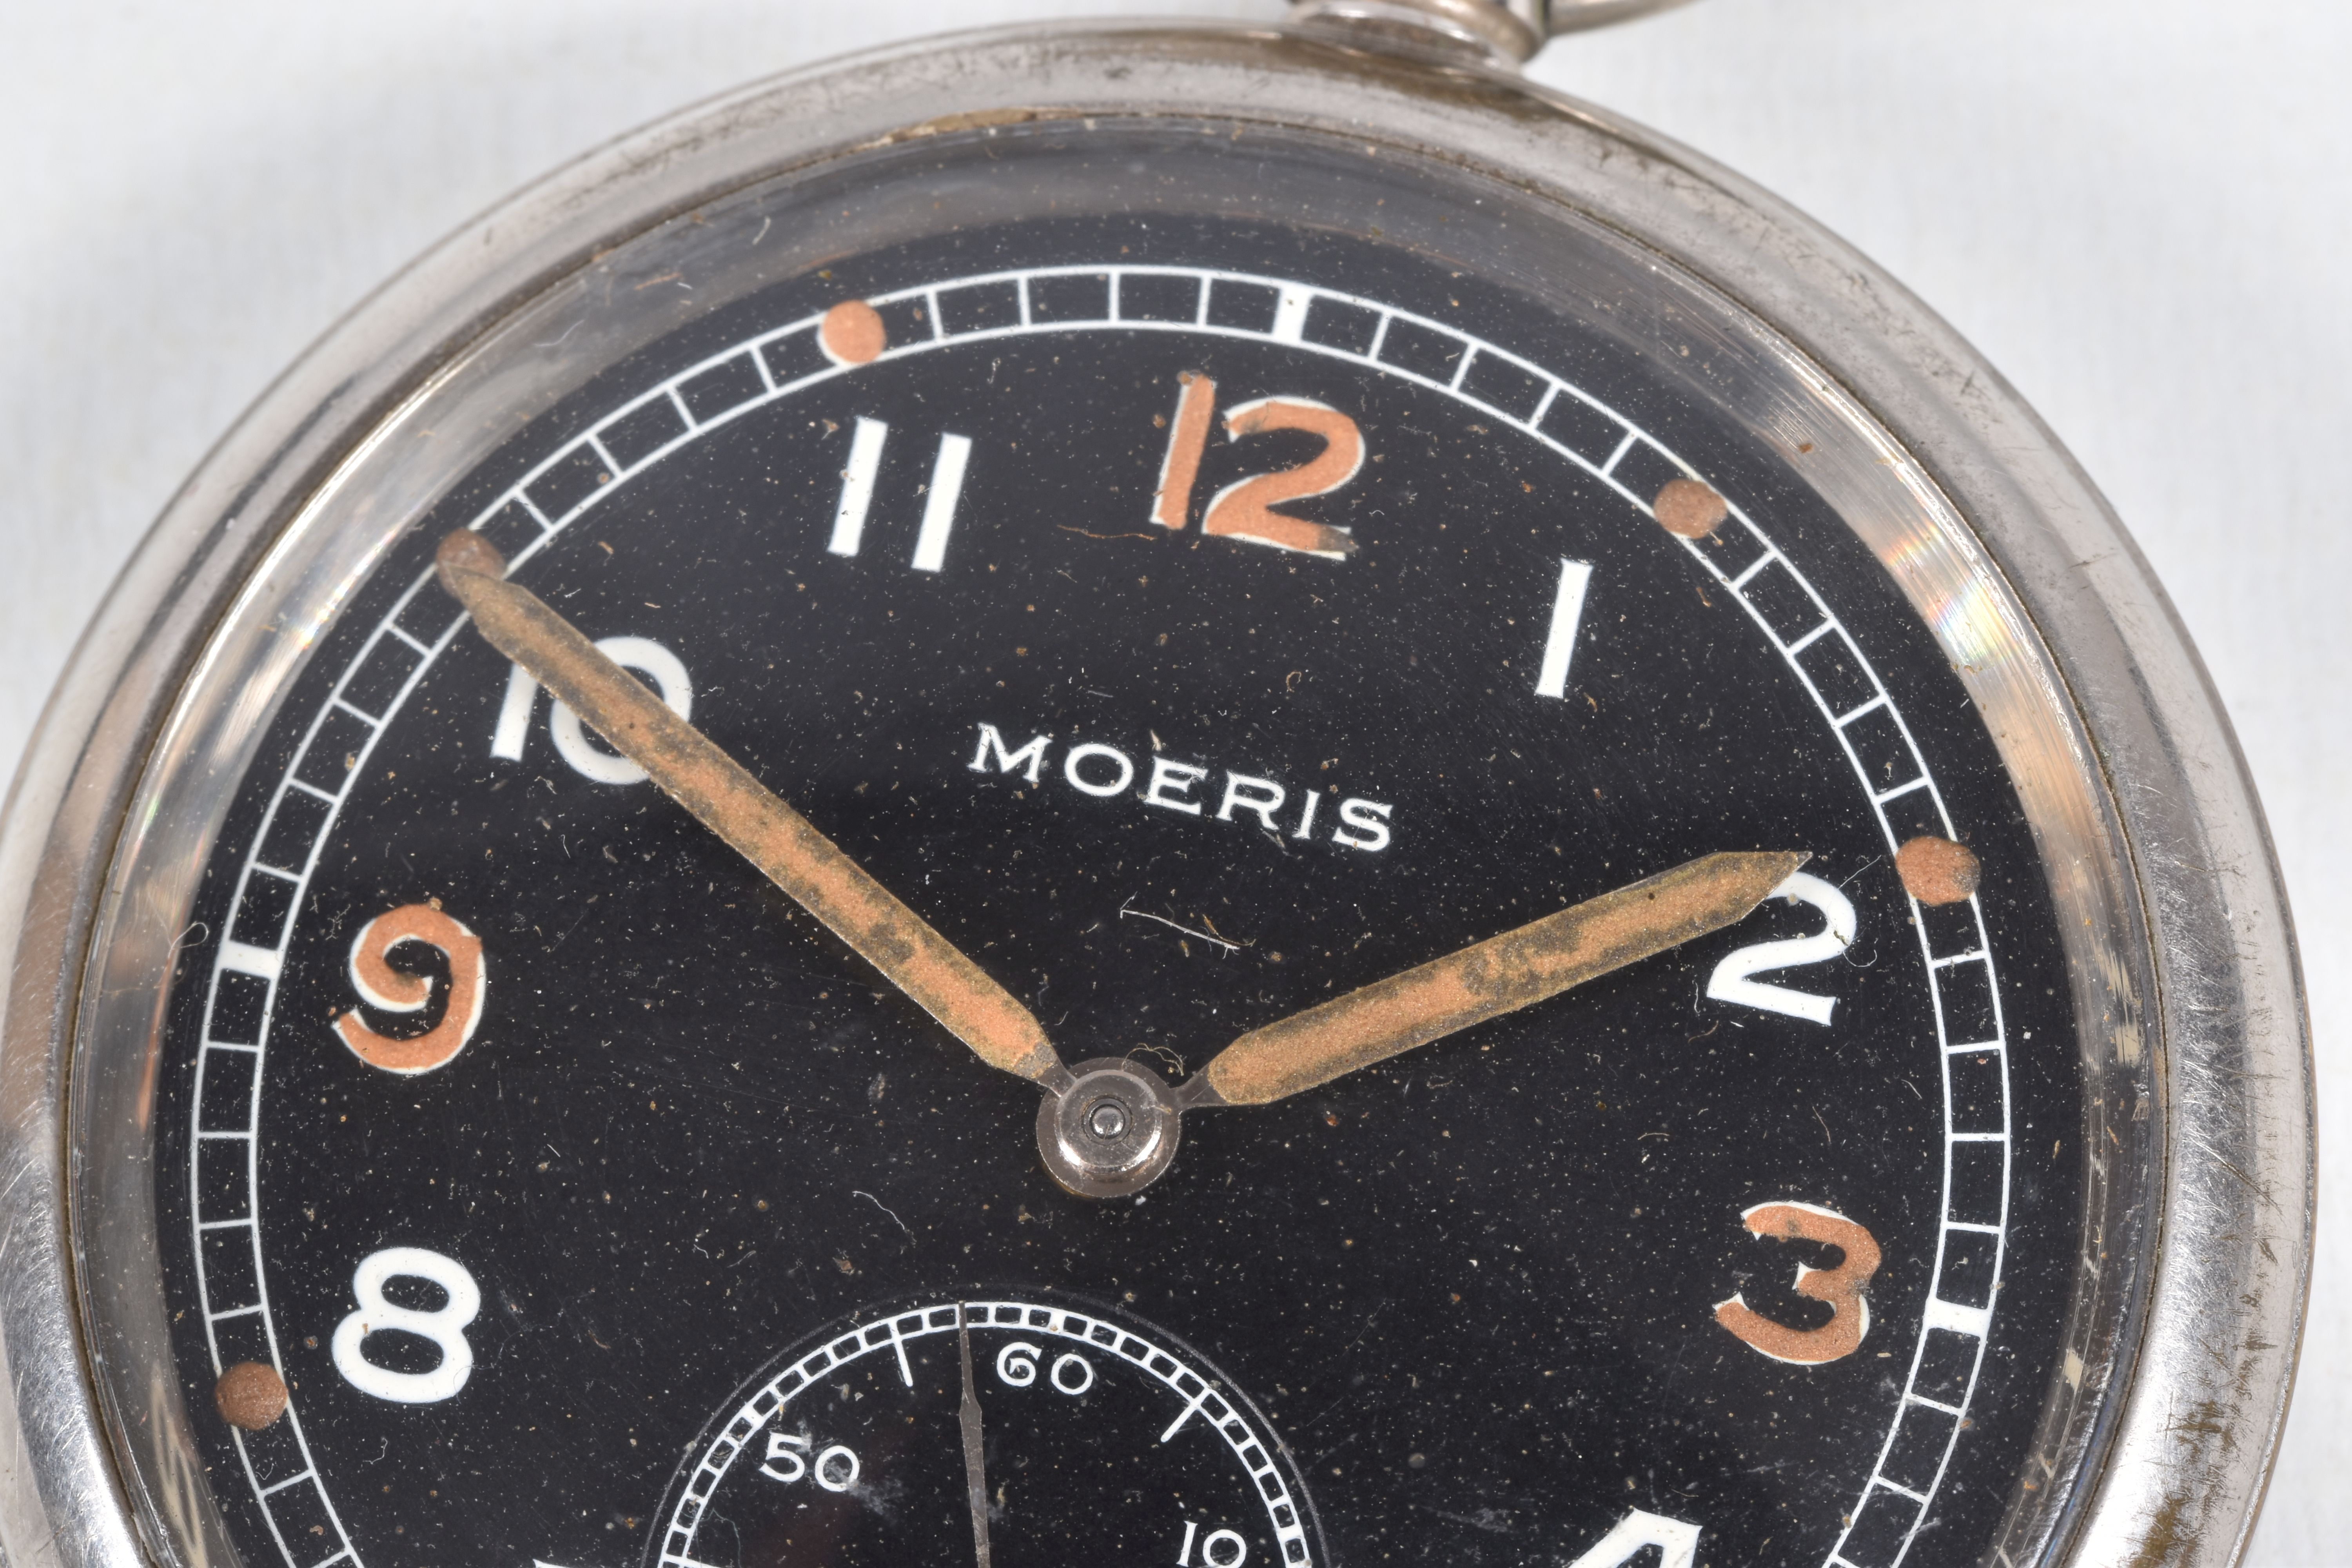 A MILITARY 'MOERIS' OPEN FACE POCKET WATCH, manual wind, round black dial signed 'Moeris', Arabic - Image 2 of 6